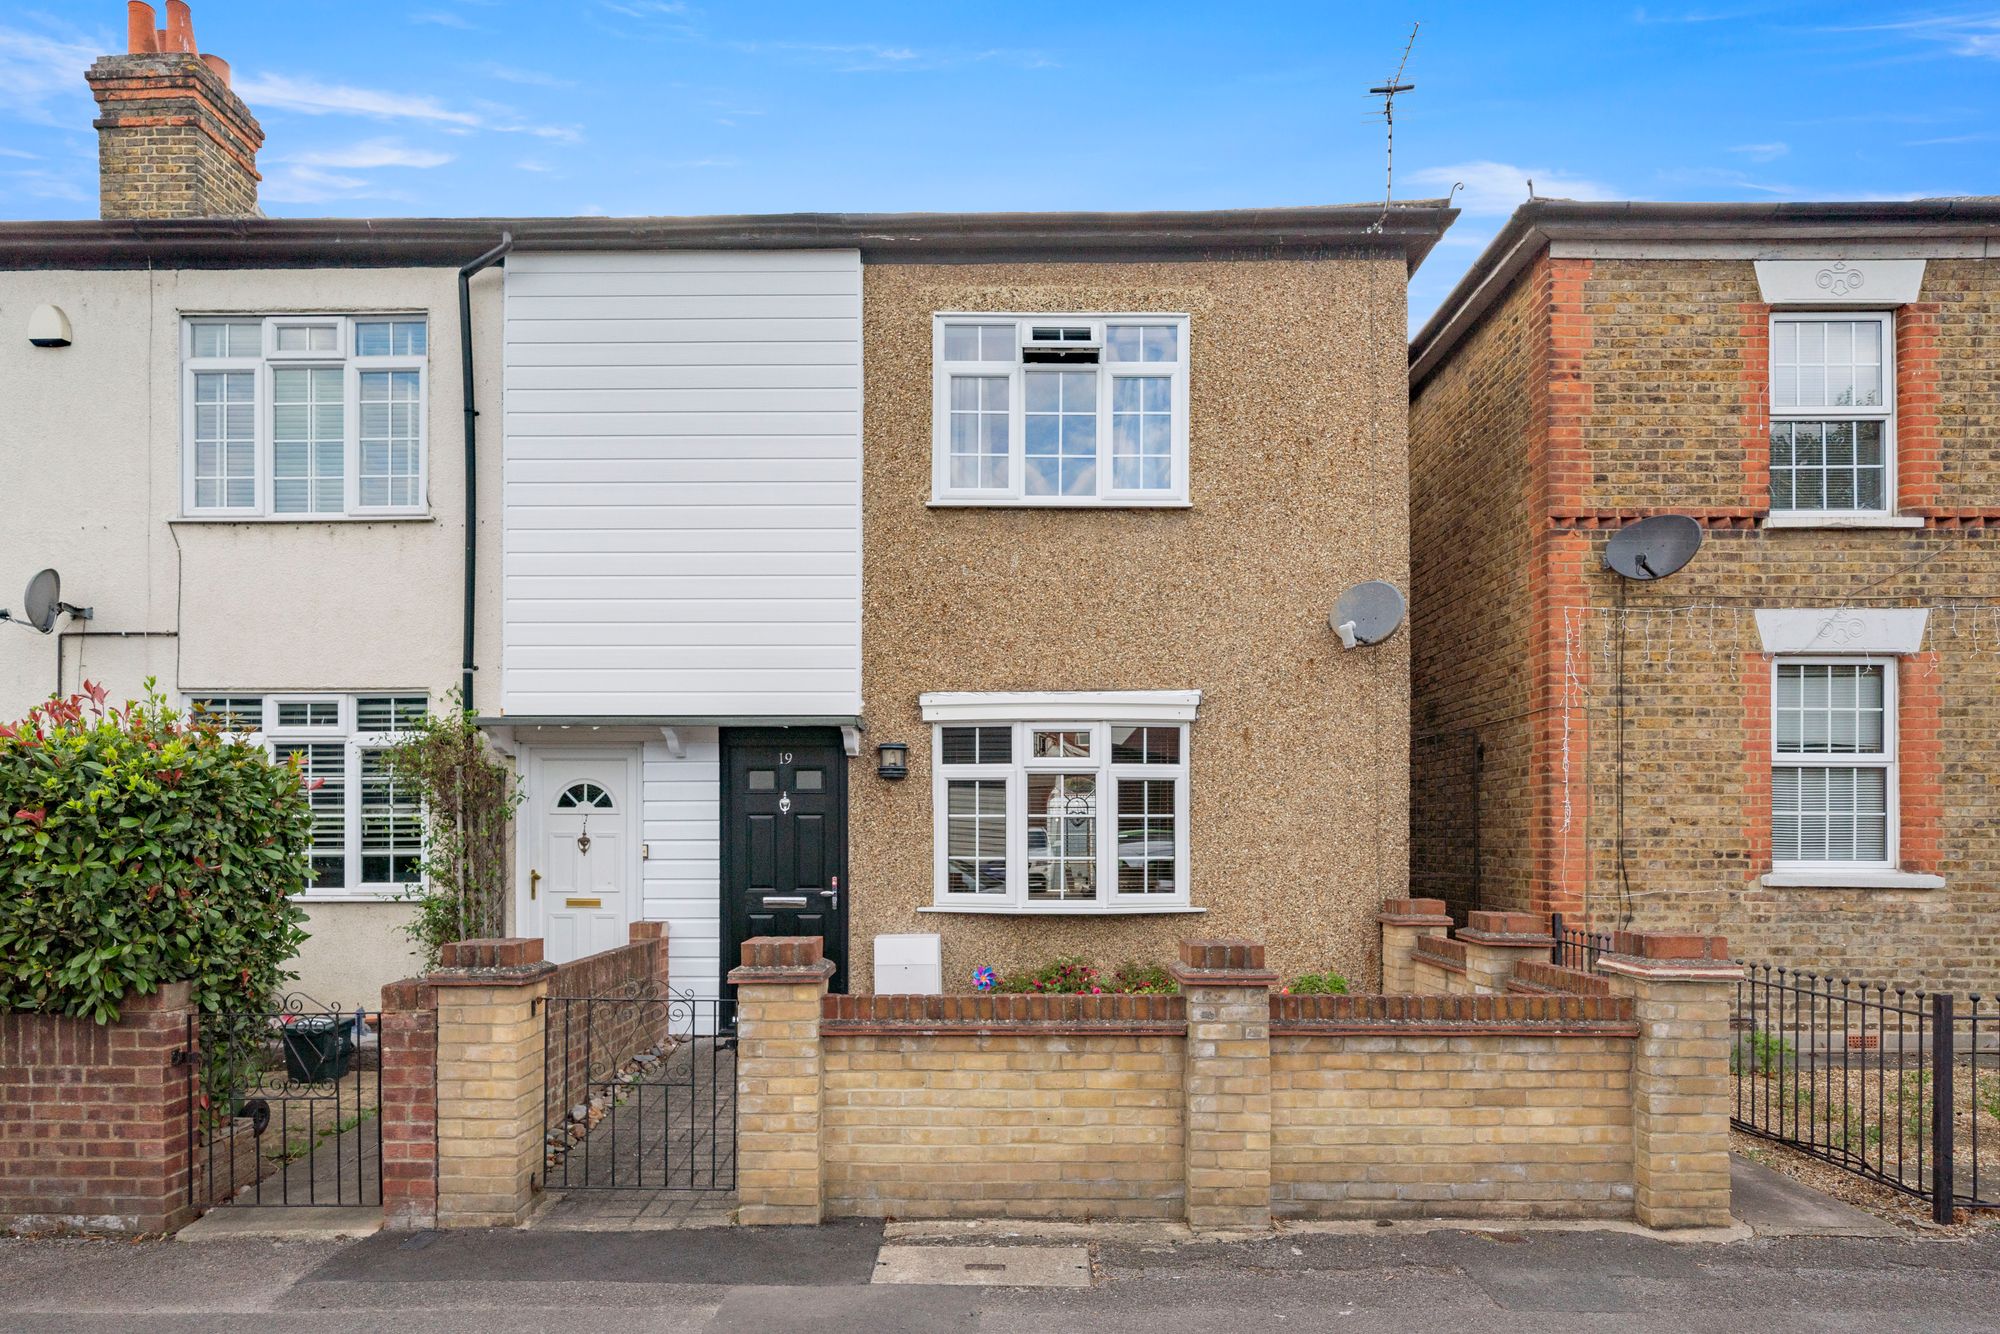 2 bed terraced house for sale in Stanwell New Road, Staines-Upon-Thames - Property Image 1